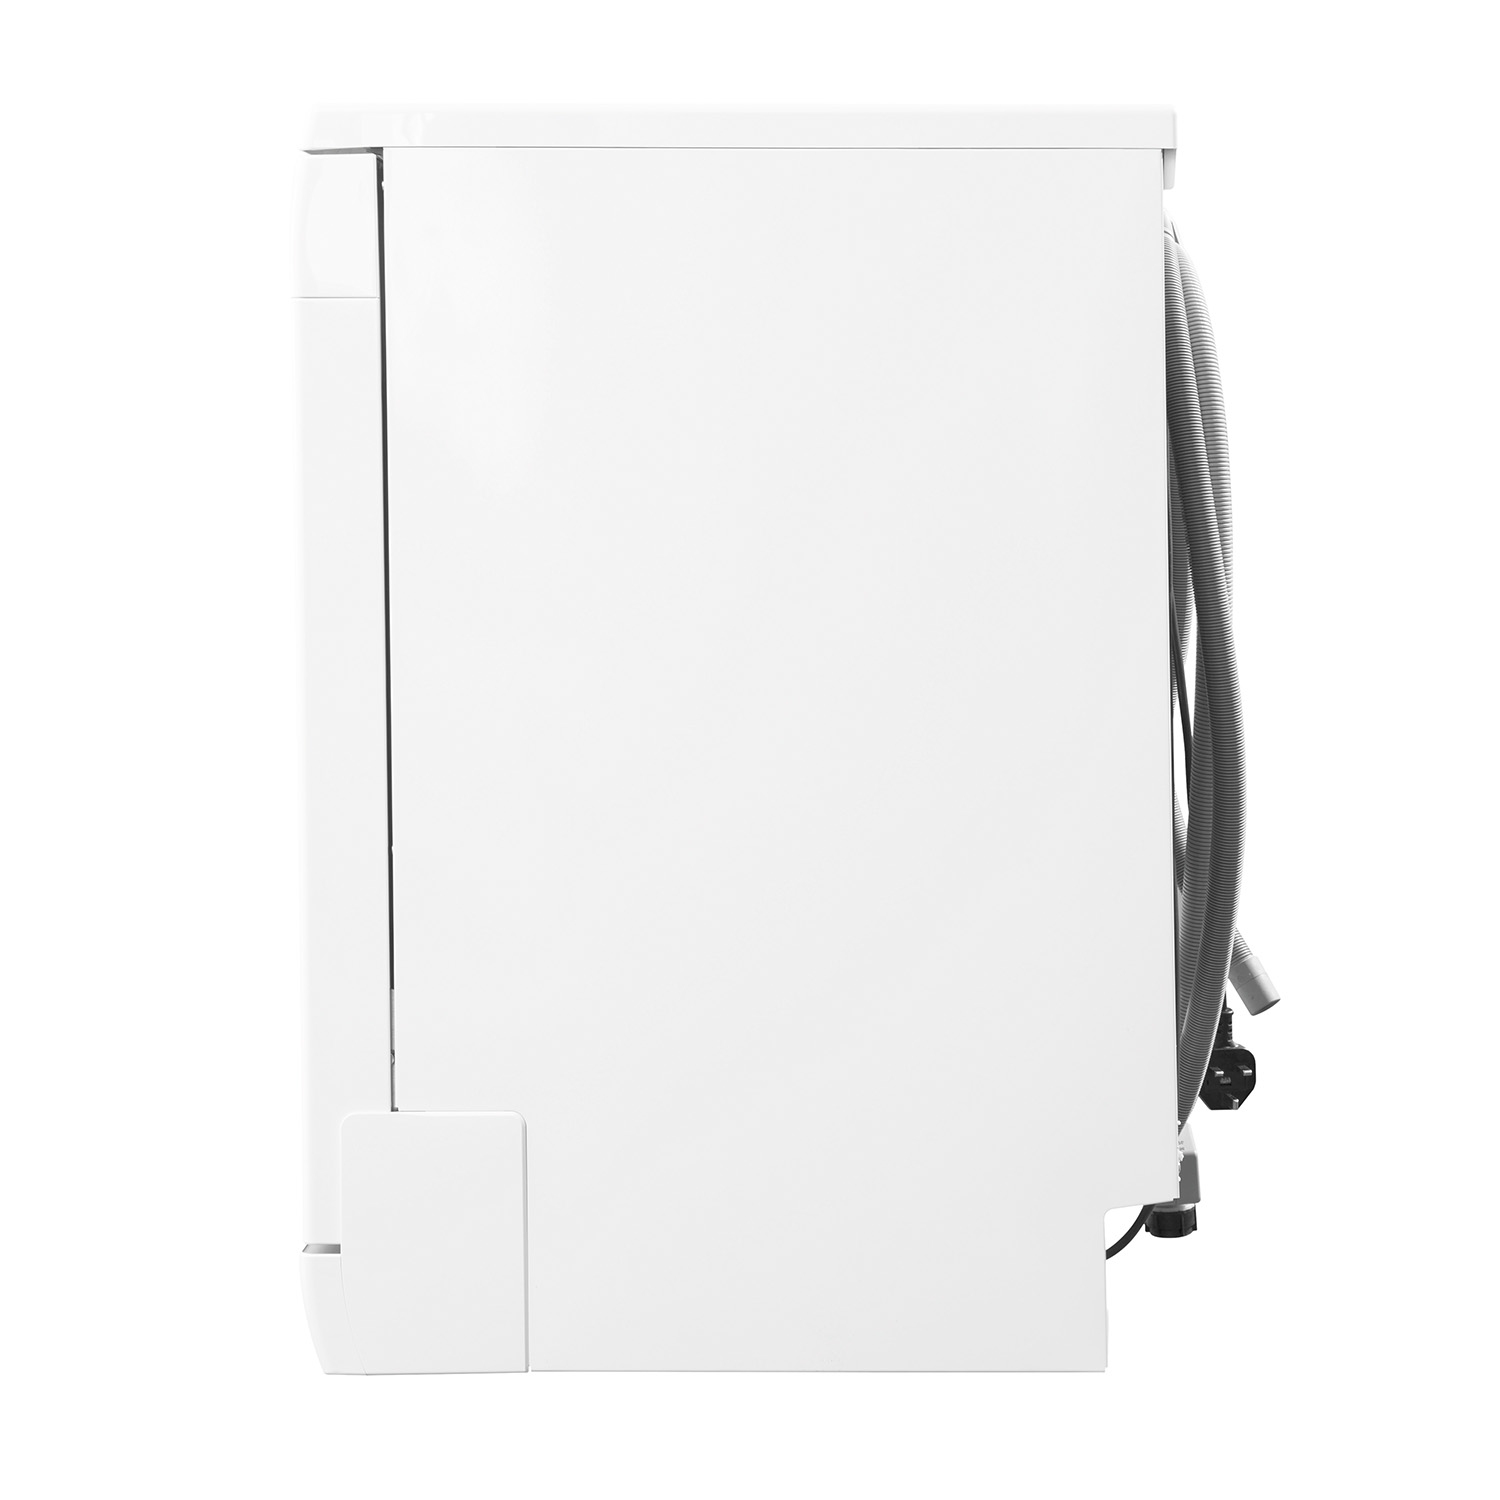 Hotpoint HEFC2B19CUKN Full Size Dishwasher - White - 13 Place Settings - 1